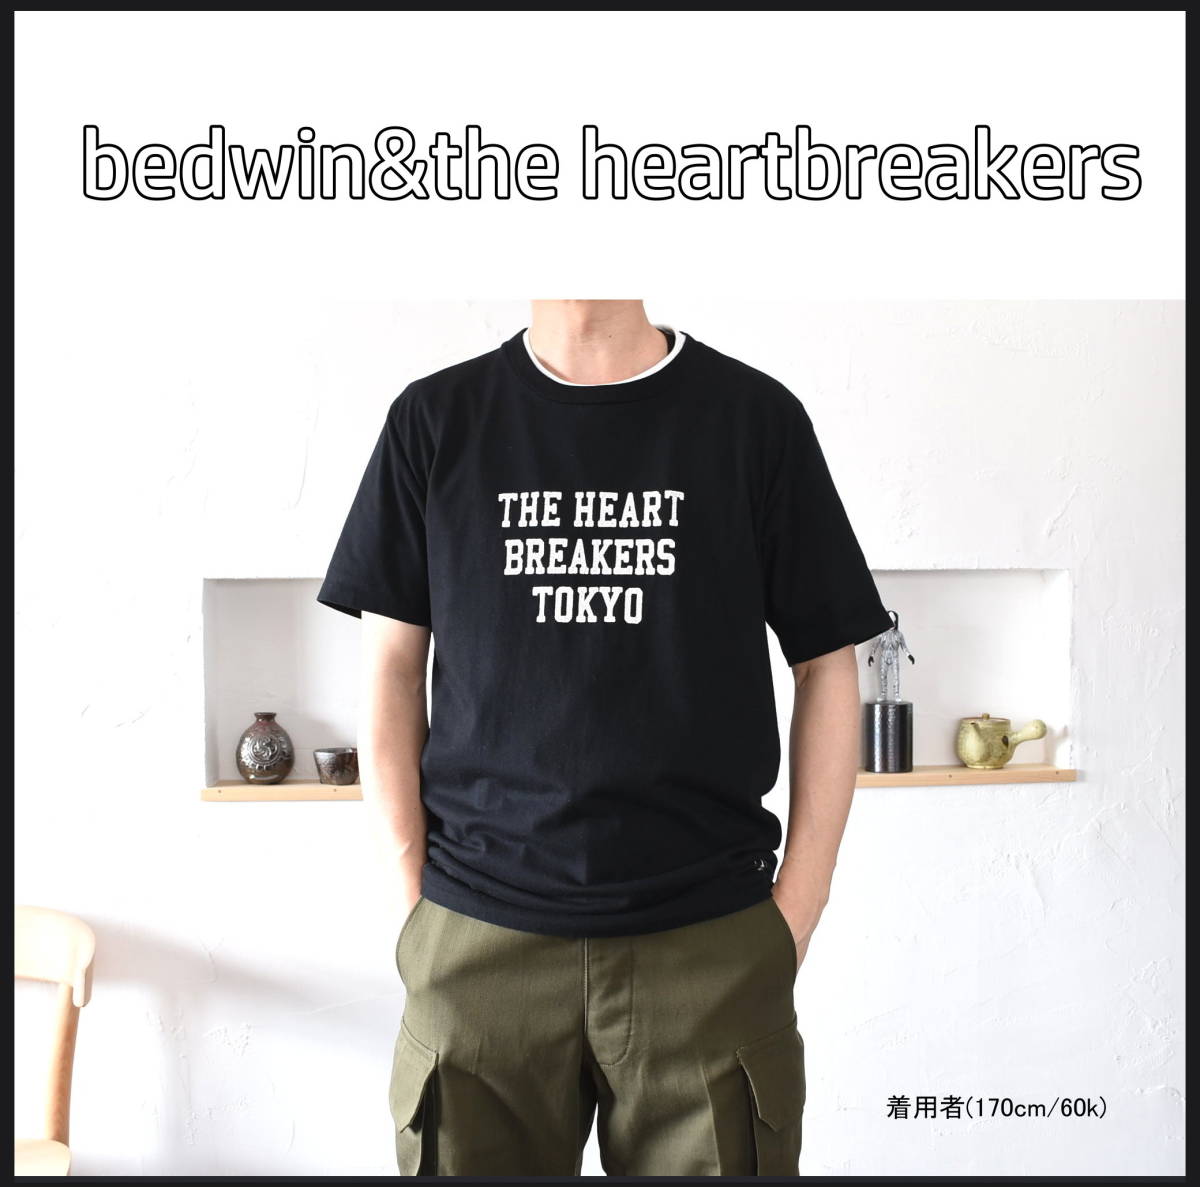 bedwin&the heartbreakers ヒビ割れ加工ロゴプリント　“IVERS PRINT” Tシャツ (size40)　ベドウィン＆ザハートブレーカーズ_画像1